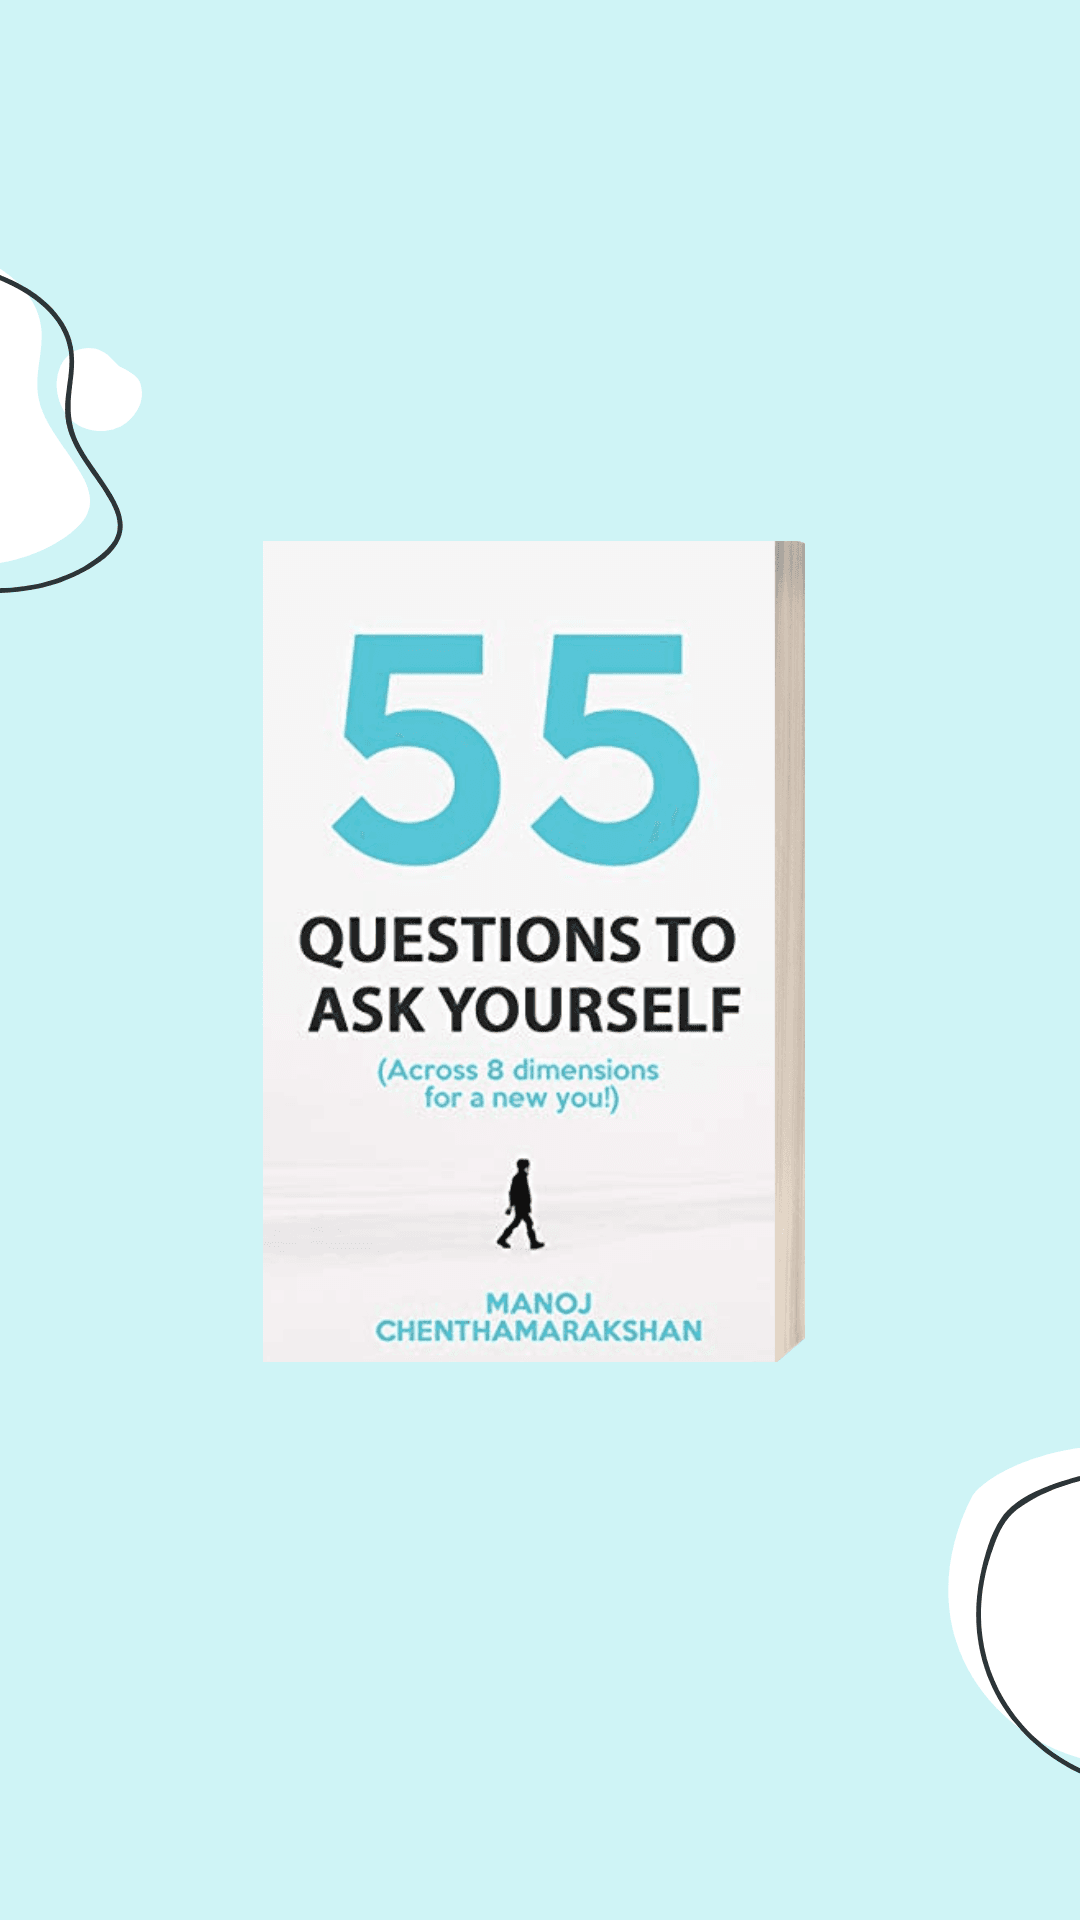 55 questions to ask yourself by Manoj